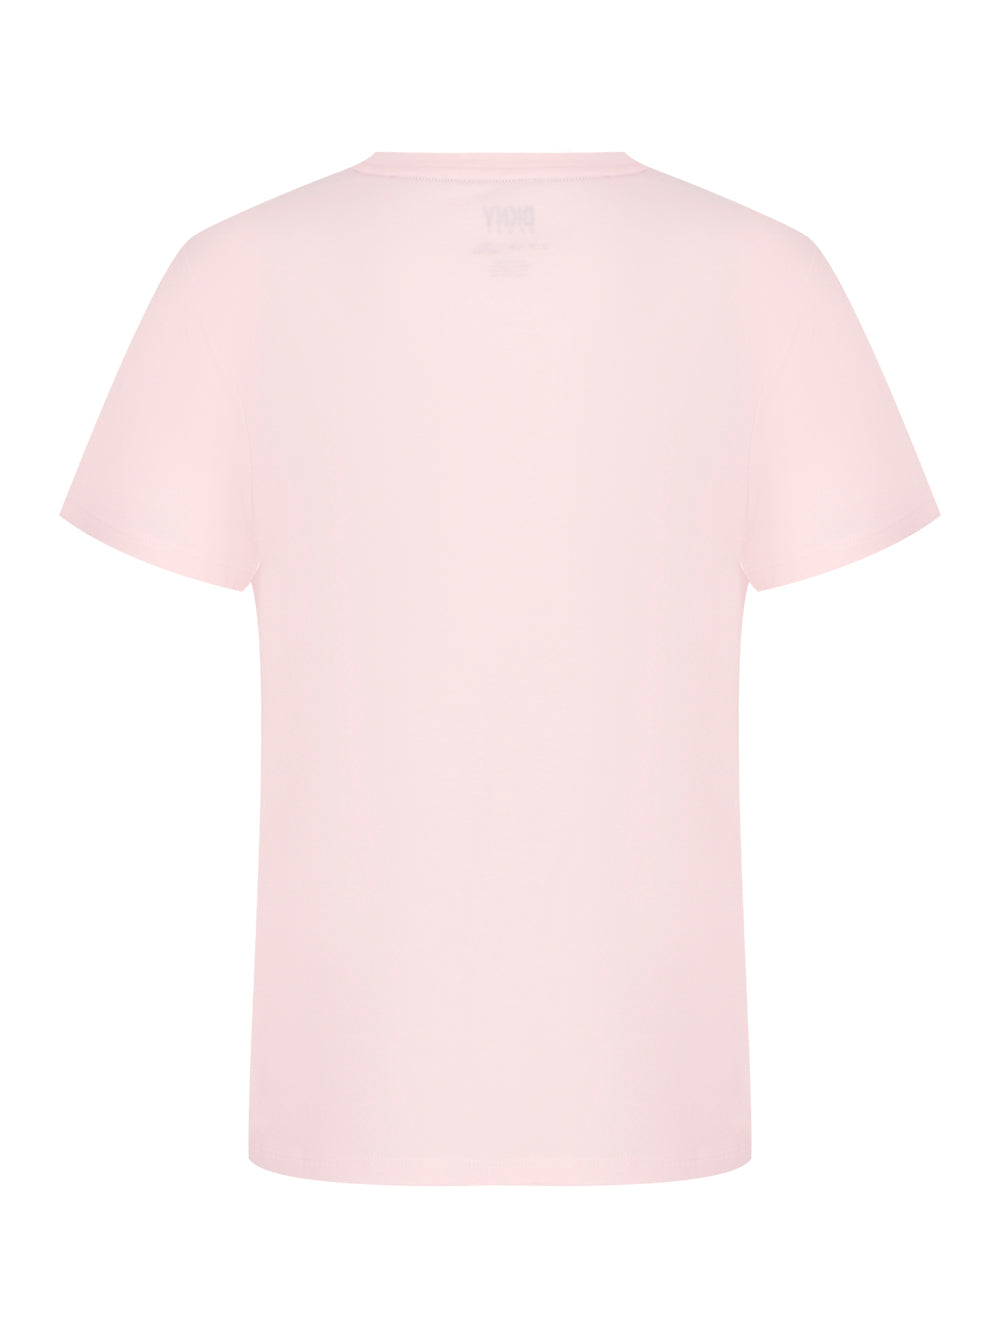 Subway Tile Graphic Tee (Crystal Rose)